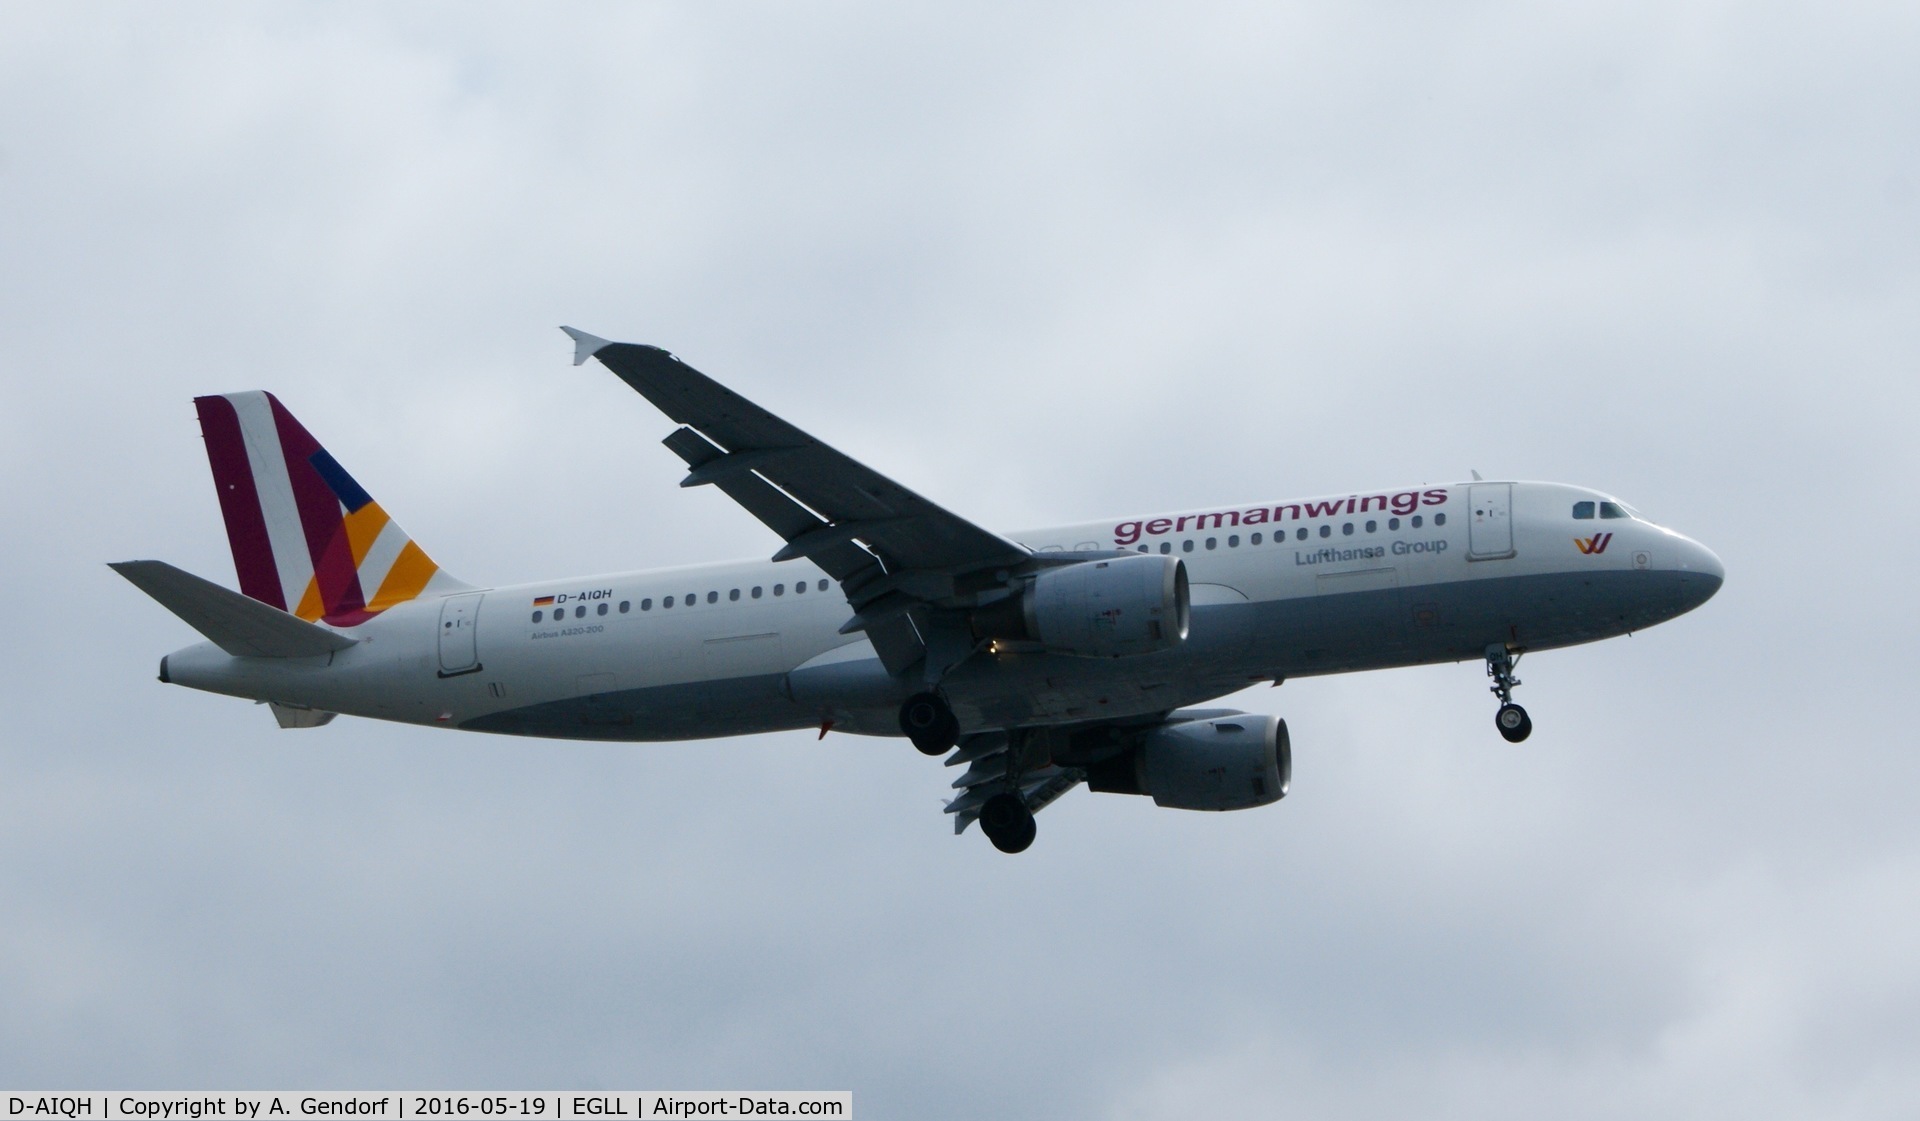 D-AIQH, 1991 Airbus A320-211 C/N 217, Germanwings, is here on short finals RWY 27R at London Heathrow(EGLL)